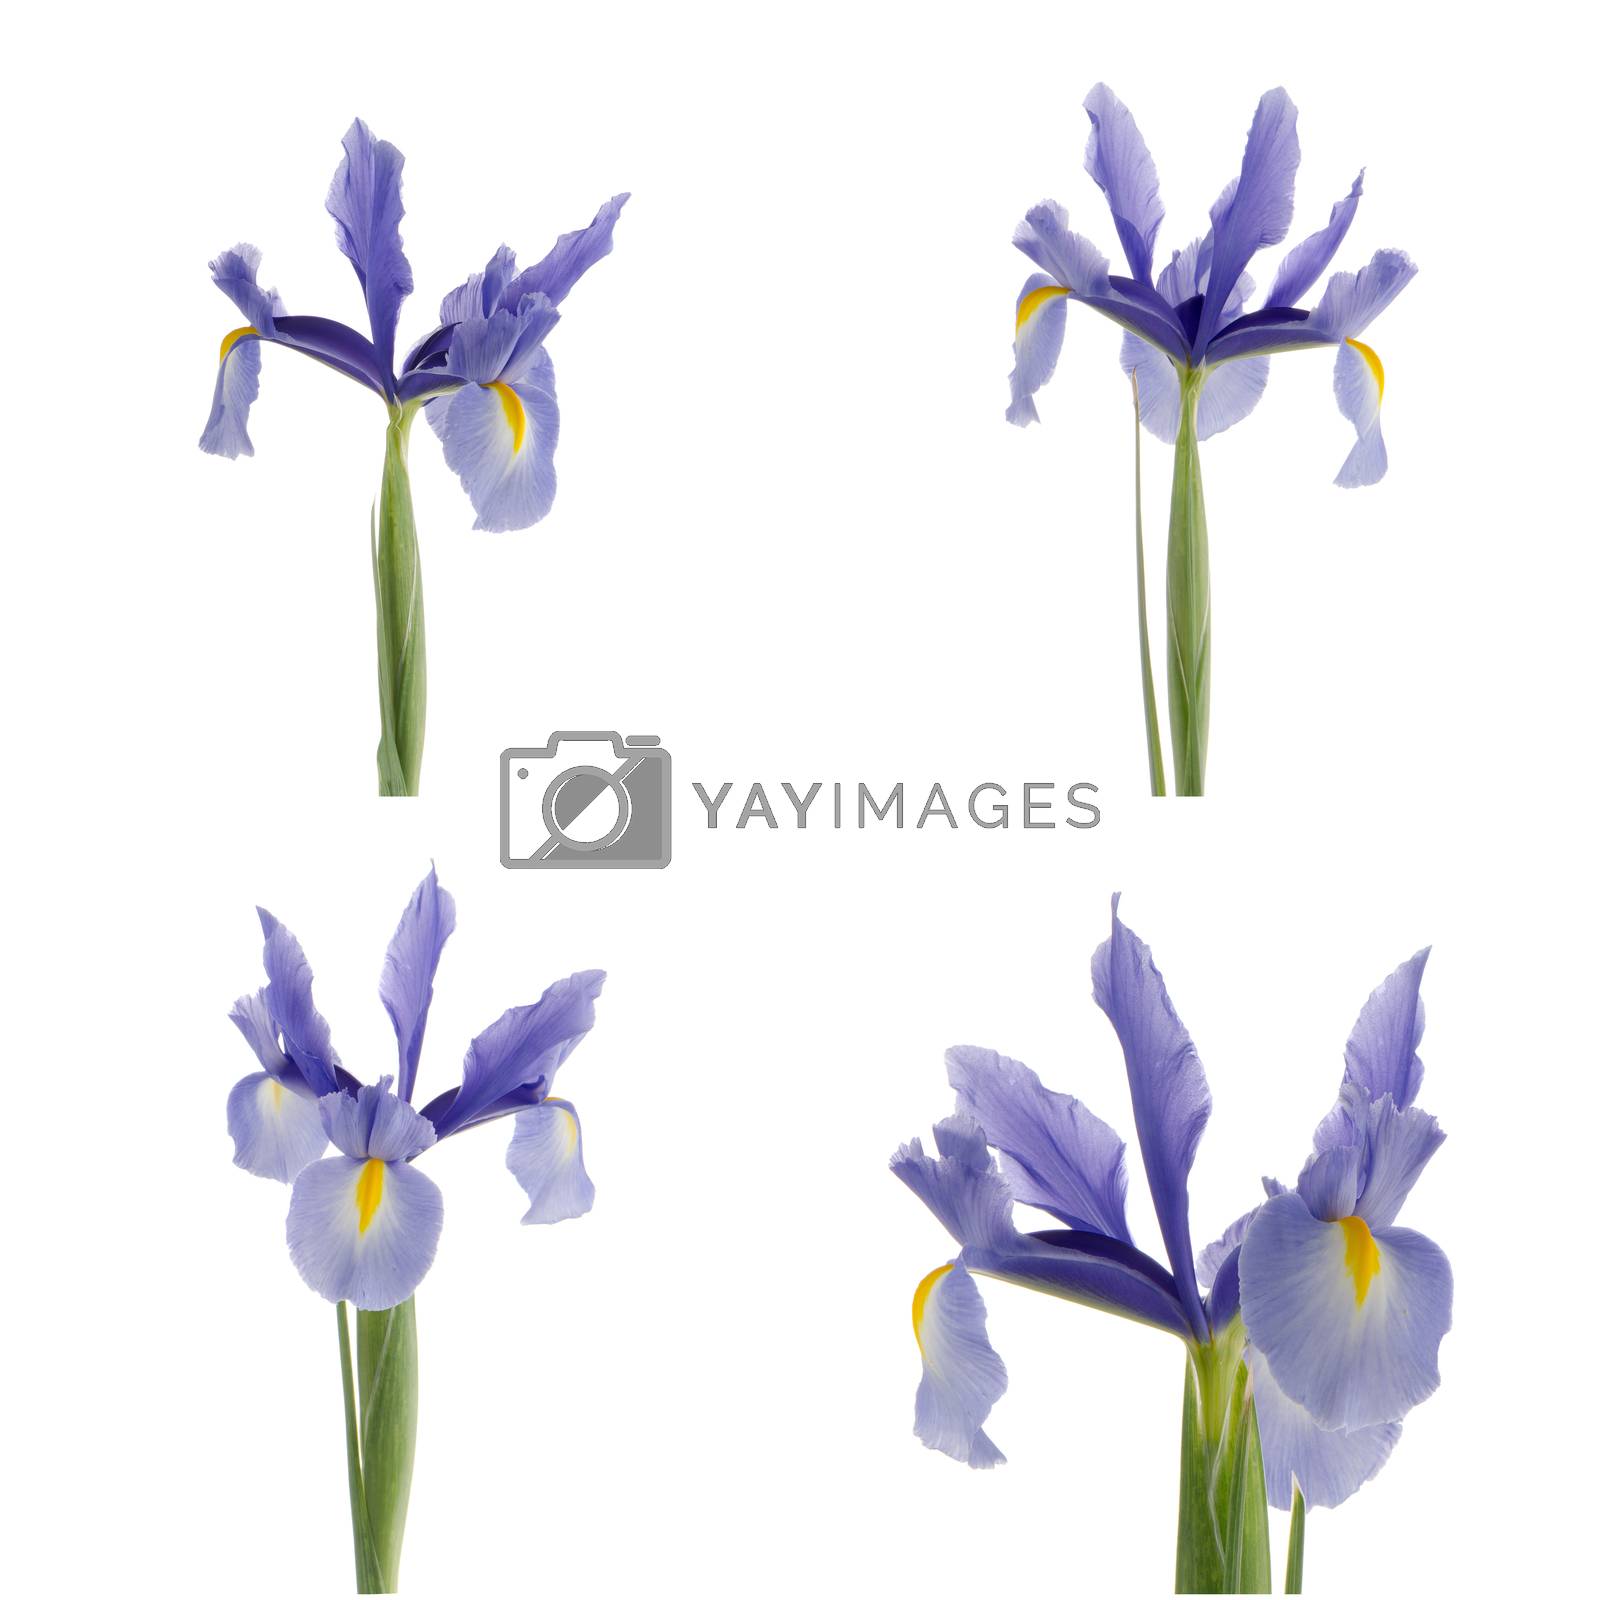 Royalty free image of Purple lilies by homydesign